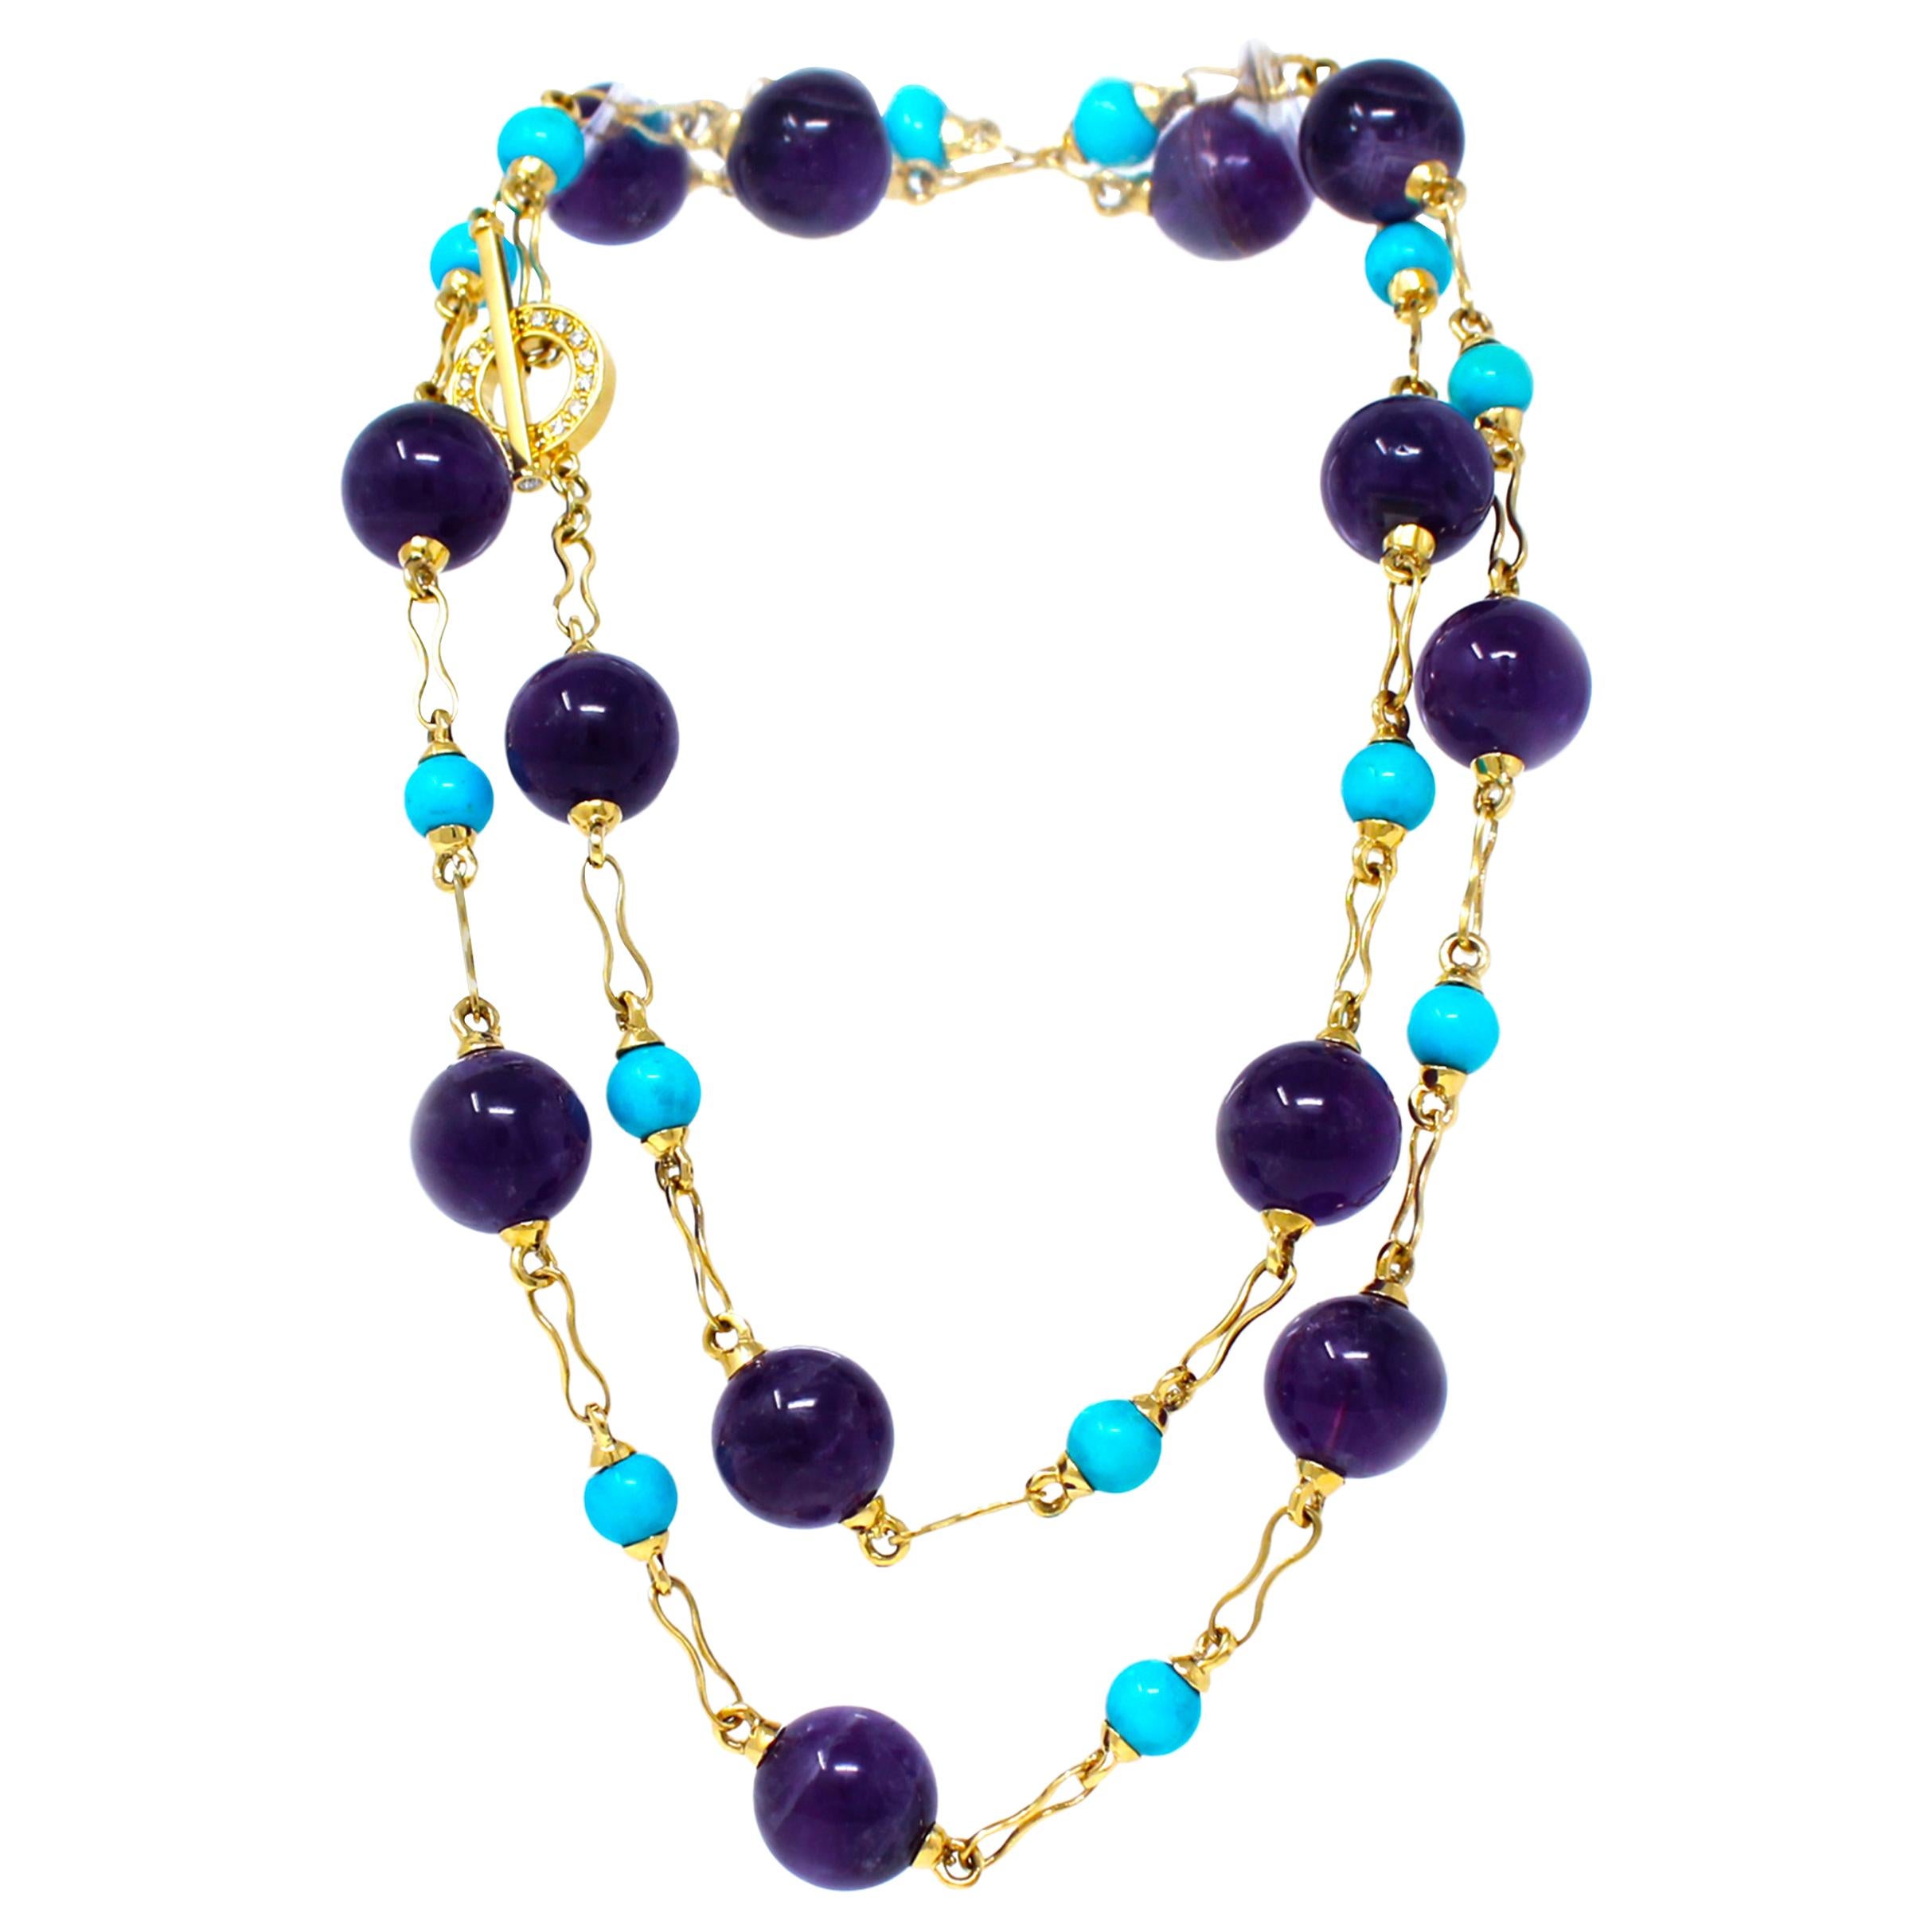 Rosaria Varra Turquoise and Amethyst Beads Station Necklace 18 Karat For Sale